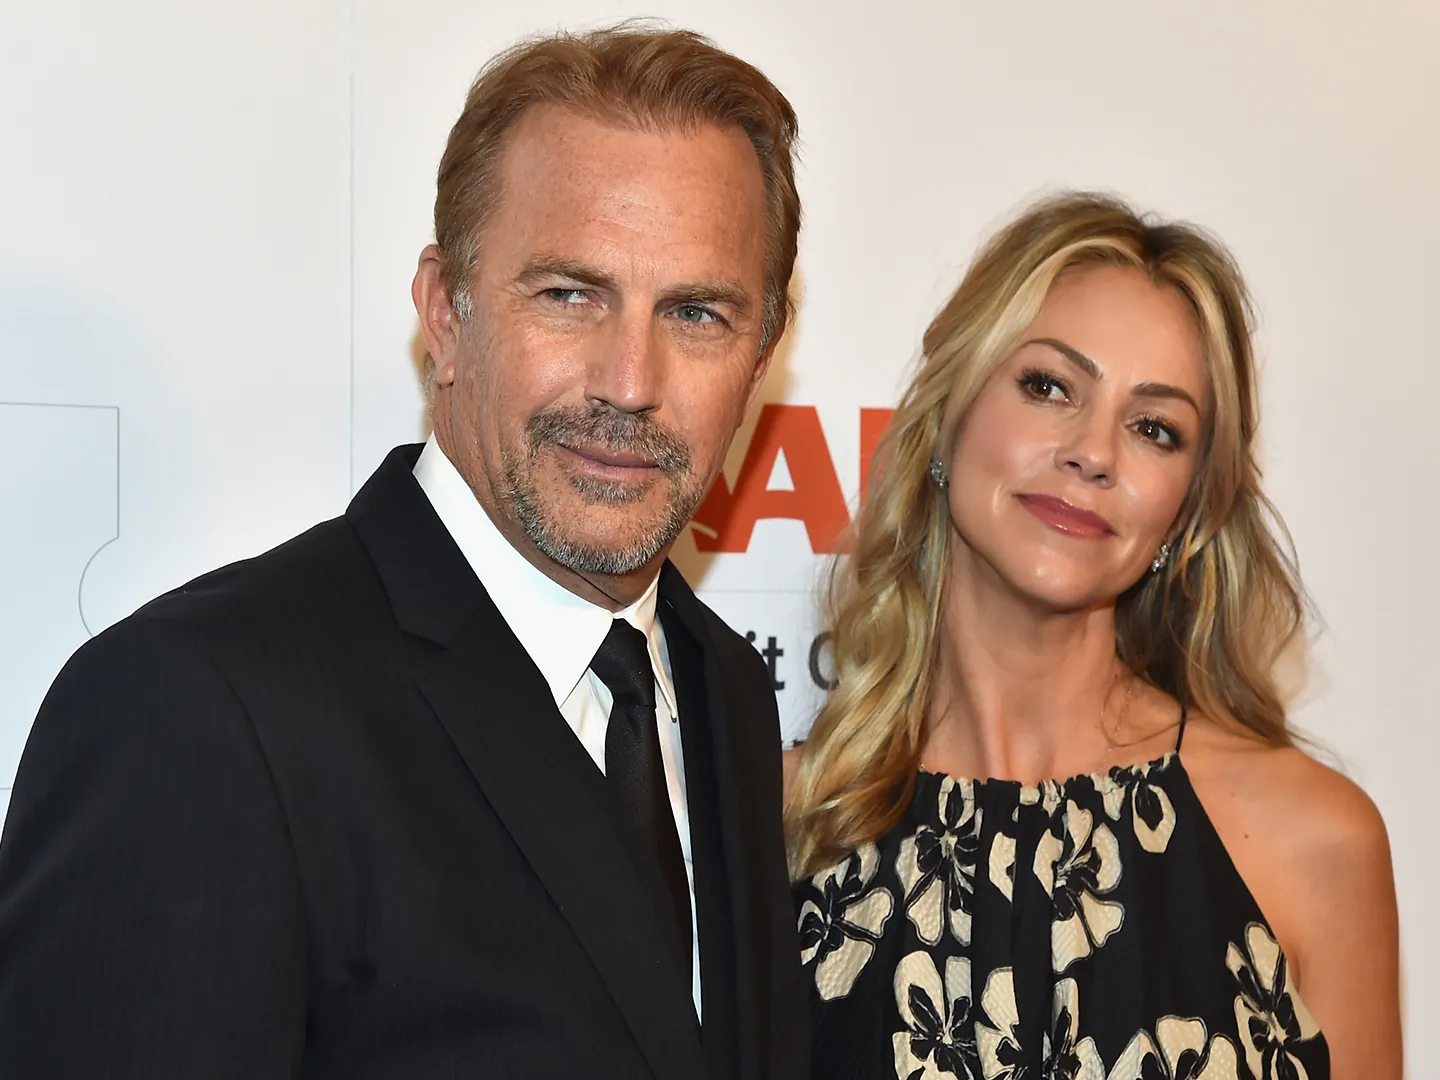 Kevin Costner Speaks Out: The True Reasons Behind His Unexpected Divorce and Career Shifts